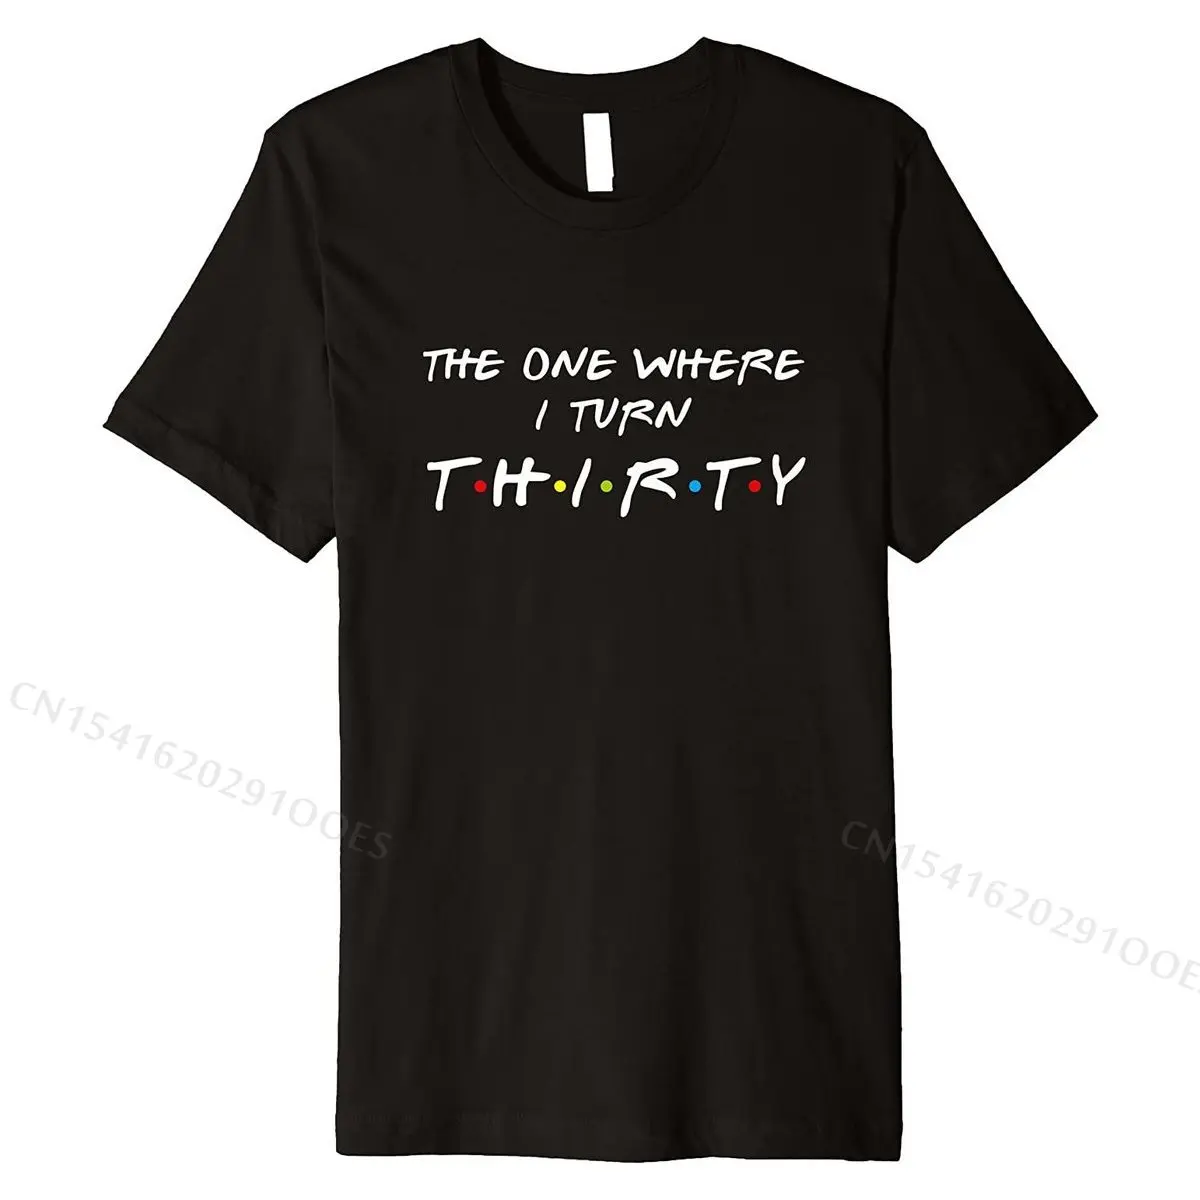 

The One Where I Turn Thirty 30 Birthday Funny Graphic Premium T-Shirt T Shirts Tops Shirt for Men New Arrival Cotton T Shirt